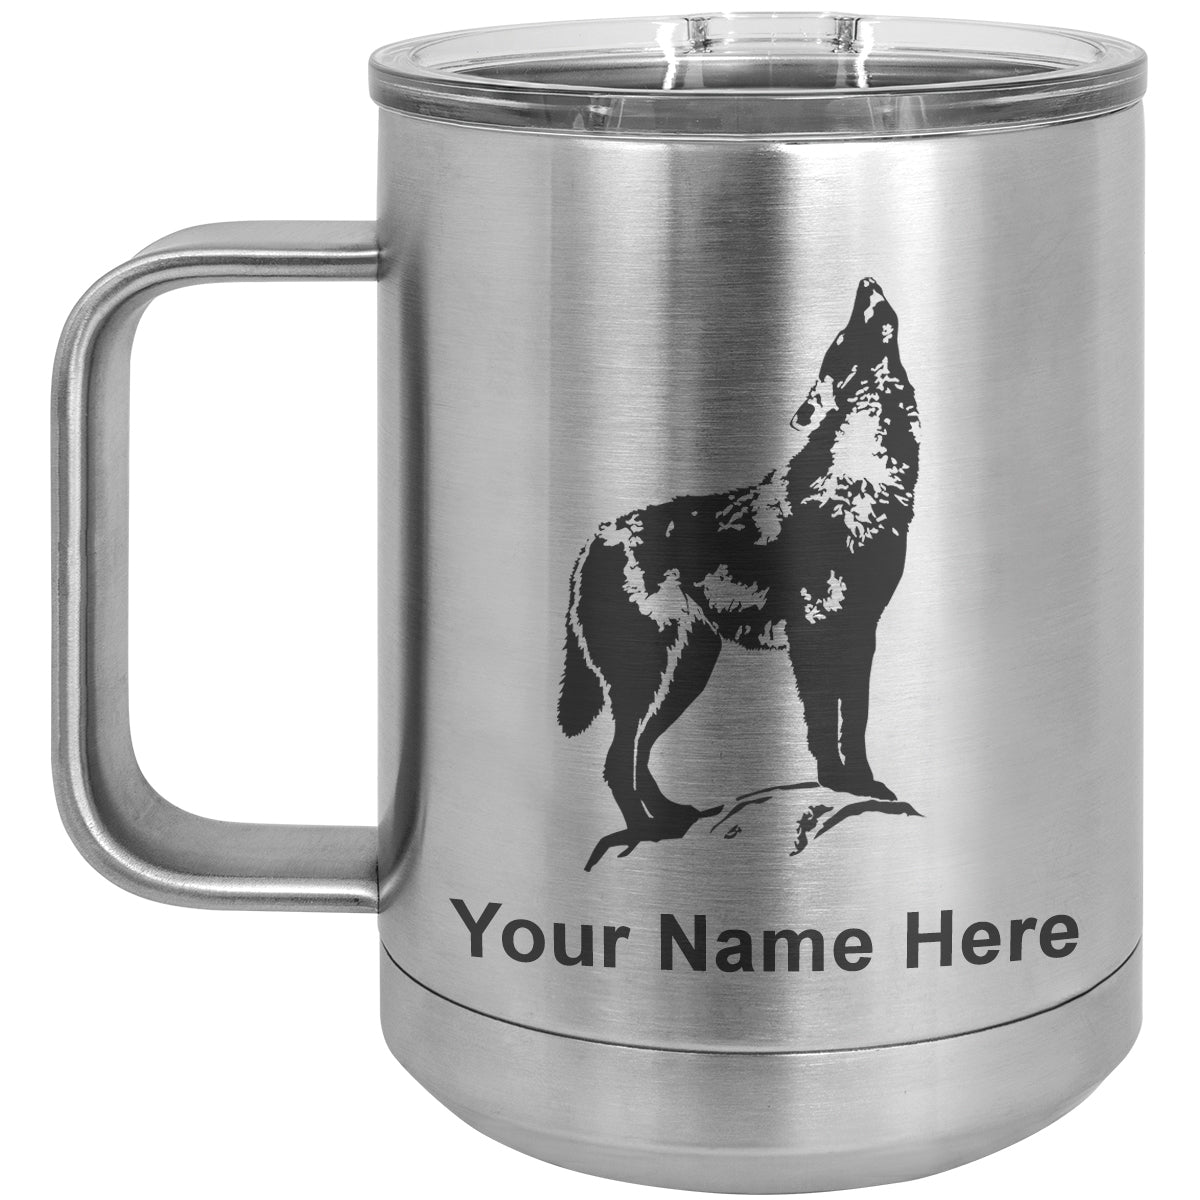 15oz Vacuum Insulated Coffee Mug, Howling Wolf, Personalized Engraving Included